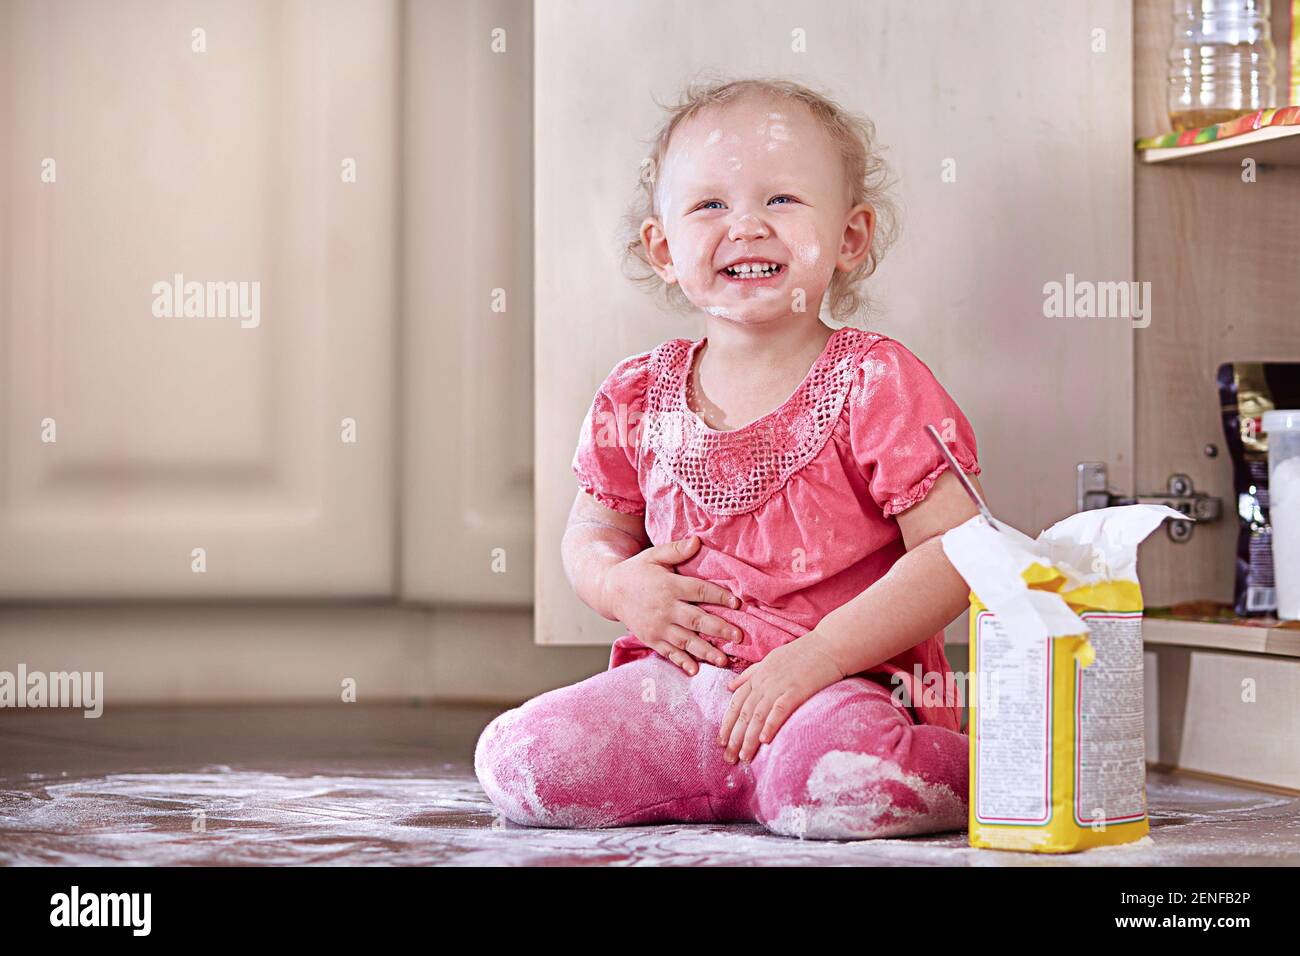 Playful laughing little baby girl smeared in flour sits on the kitchen floor. Copy space. Stock Photo